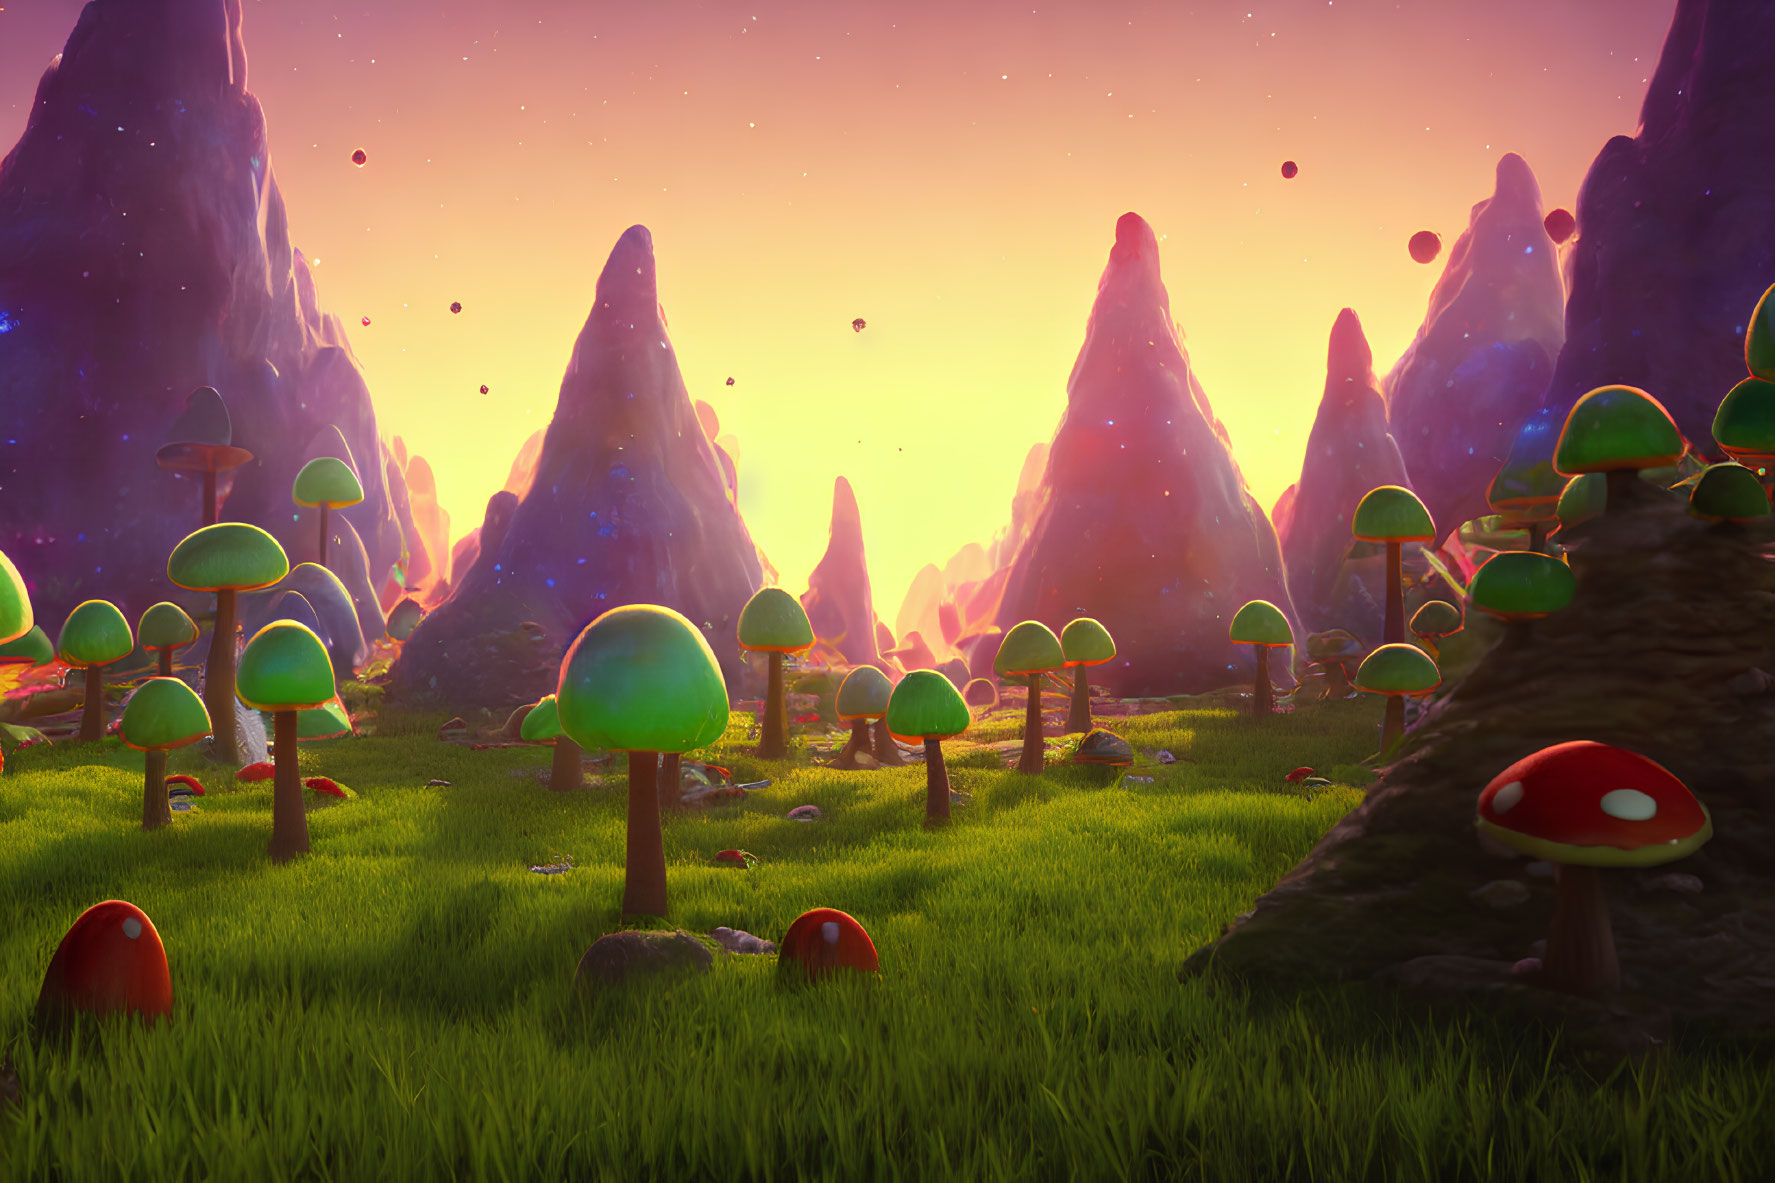 Colorful Mushroom and Towering Spires in Fantasy Landscape